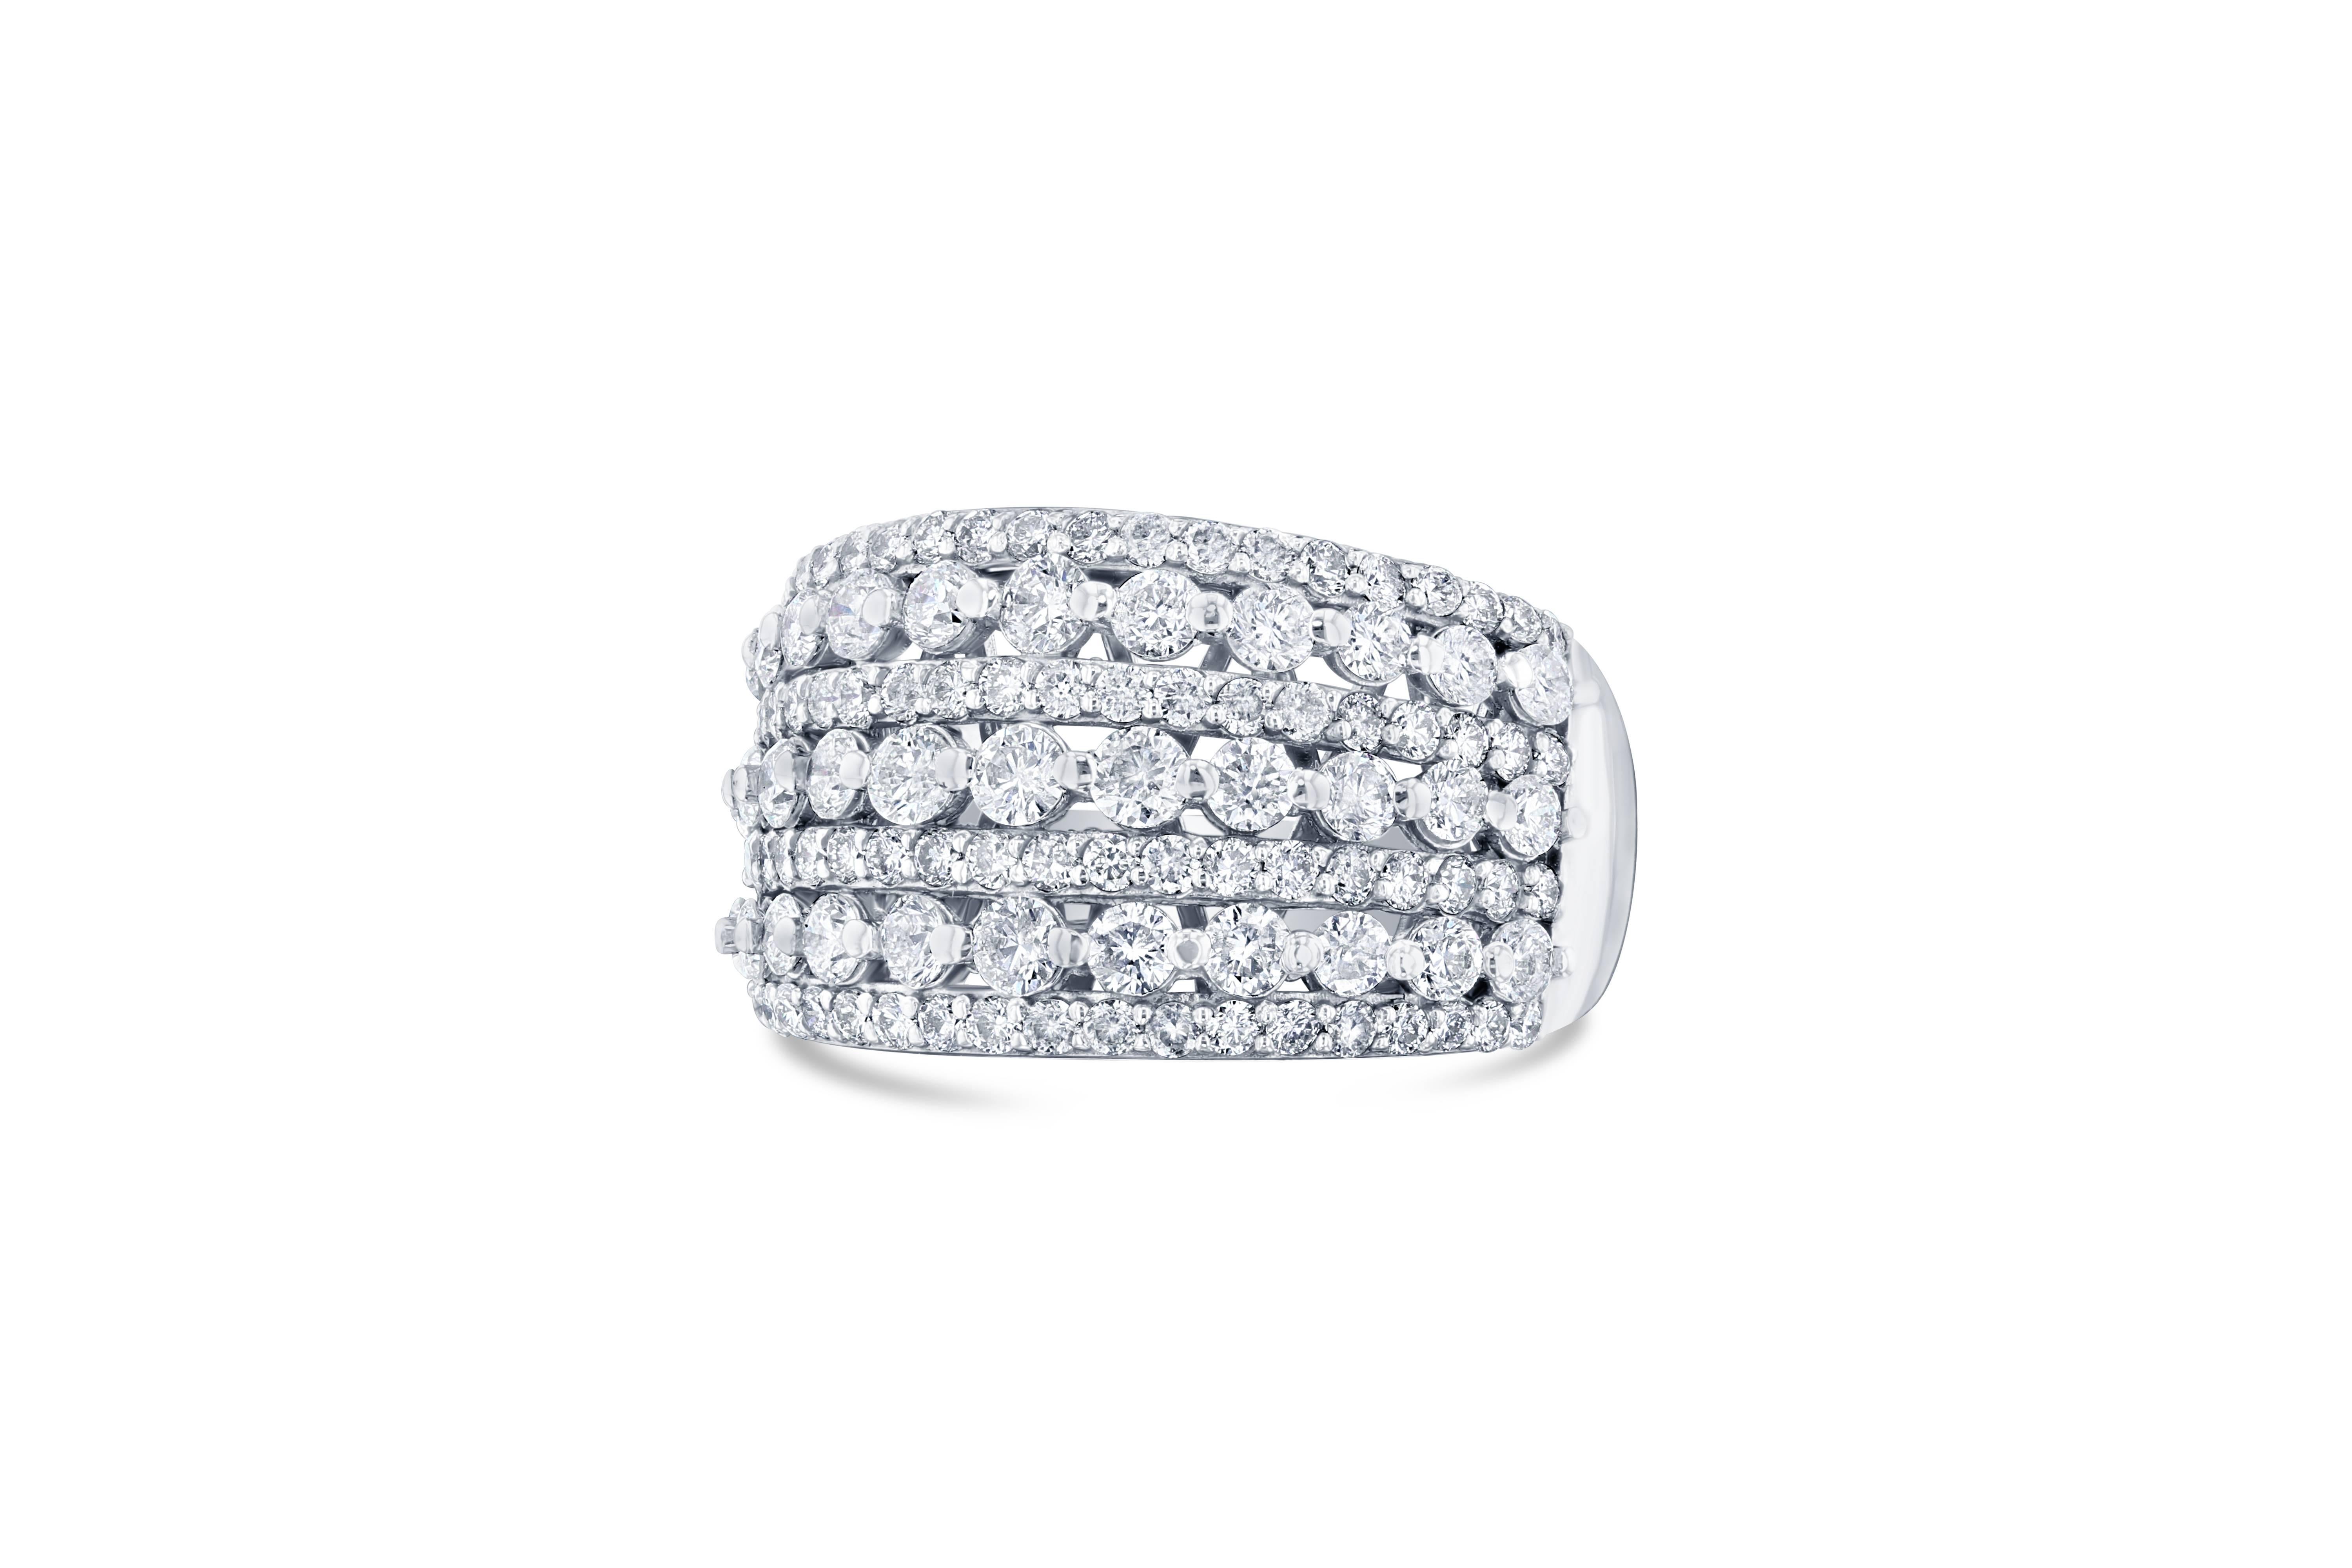 Elegance at its best; this ring is amazingly beautiful.  There are 113 Round Cut Diamonds that weigh 2.06 carats.  The Clarity and Color is: SI1 and F.  This ring is casted in 14K White Gold and weighs approximately 6.2 grams.  The ring is a size